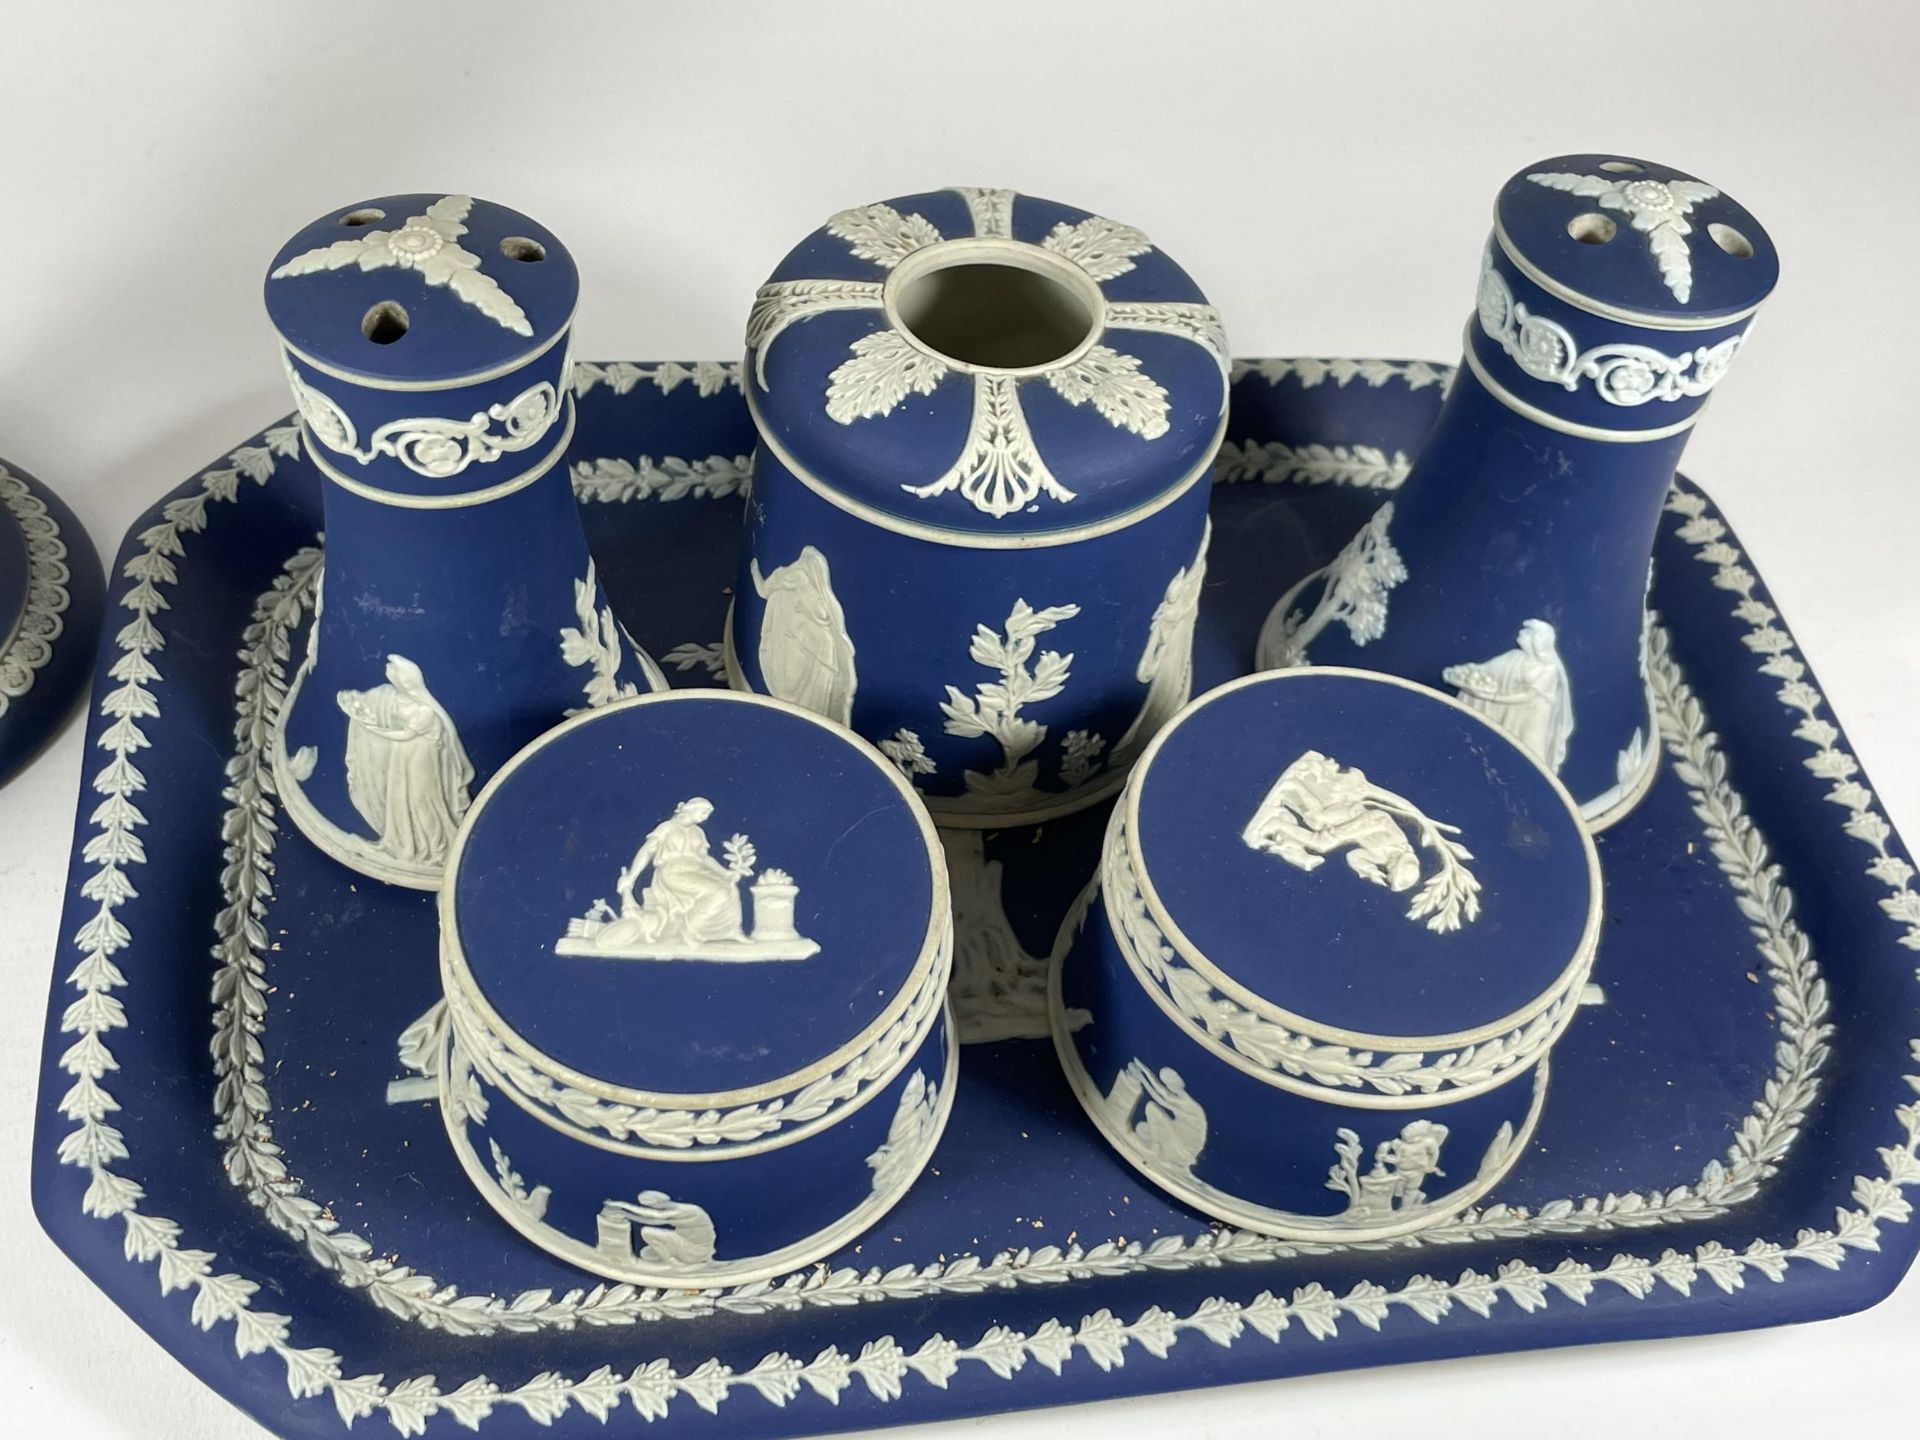 AN ADAMS JASPERWARE POTTERY DRESSING TABLE SET WITH A PAIR OF CANDLESTICKS - Image 3 of 3